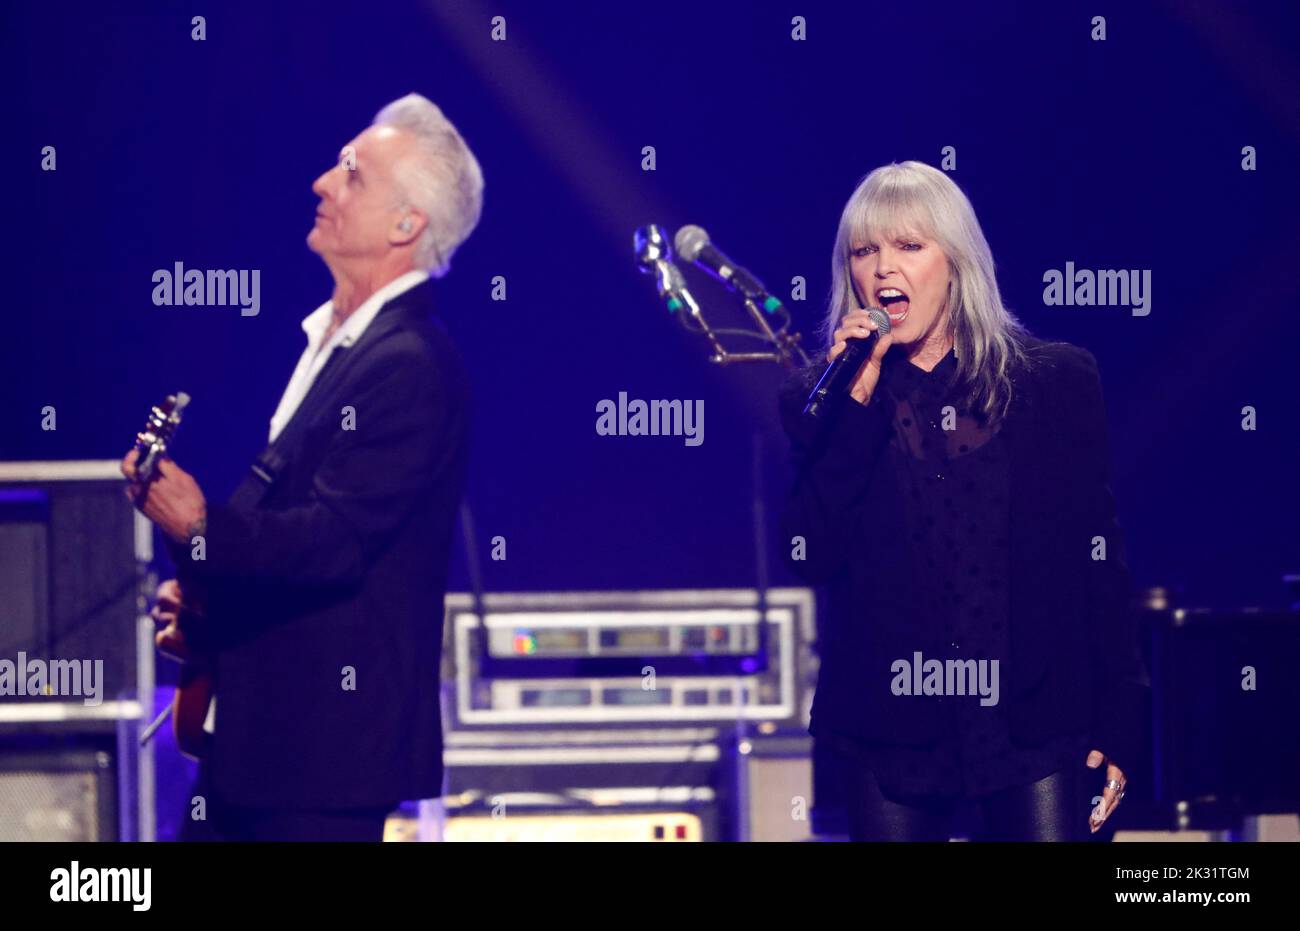 Neil Giraldo (L) and Pat Benatar perform during the first day of the iHeartRadio Music Festival 2022 at T-Mobile Arena in Las Vegas, Nevada, U.S. September 23, 2022. REUTERS/Steve Marcus Stock Photo